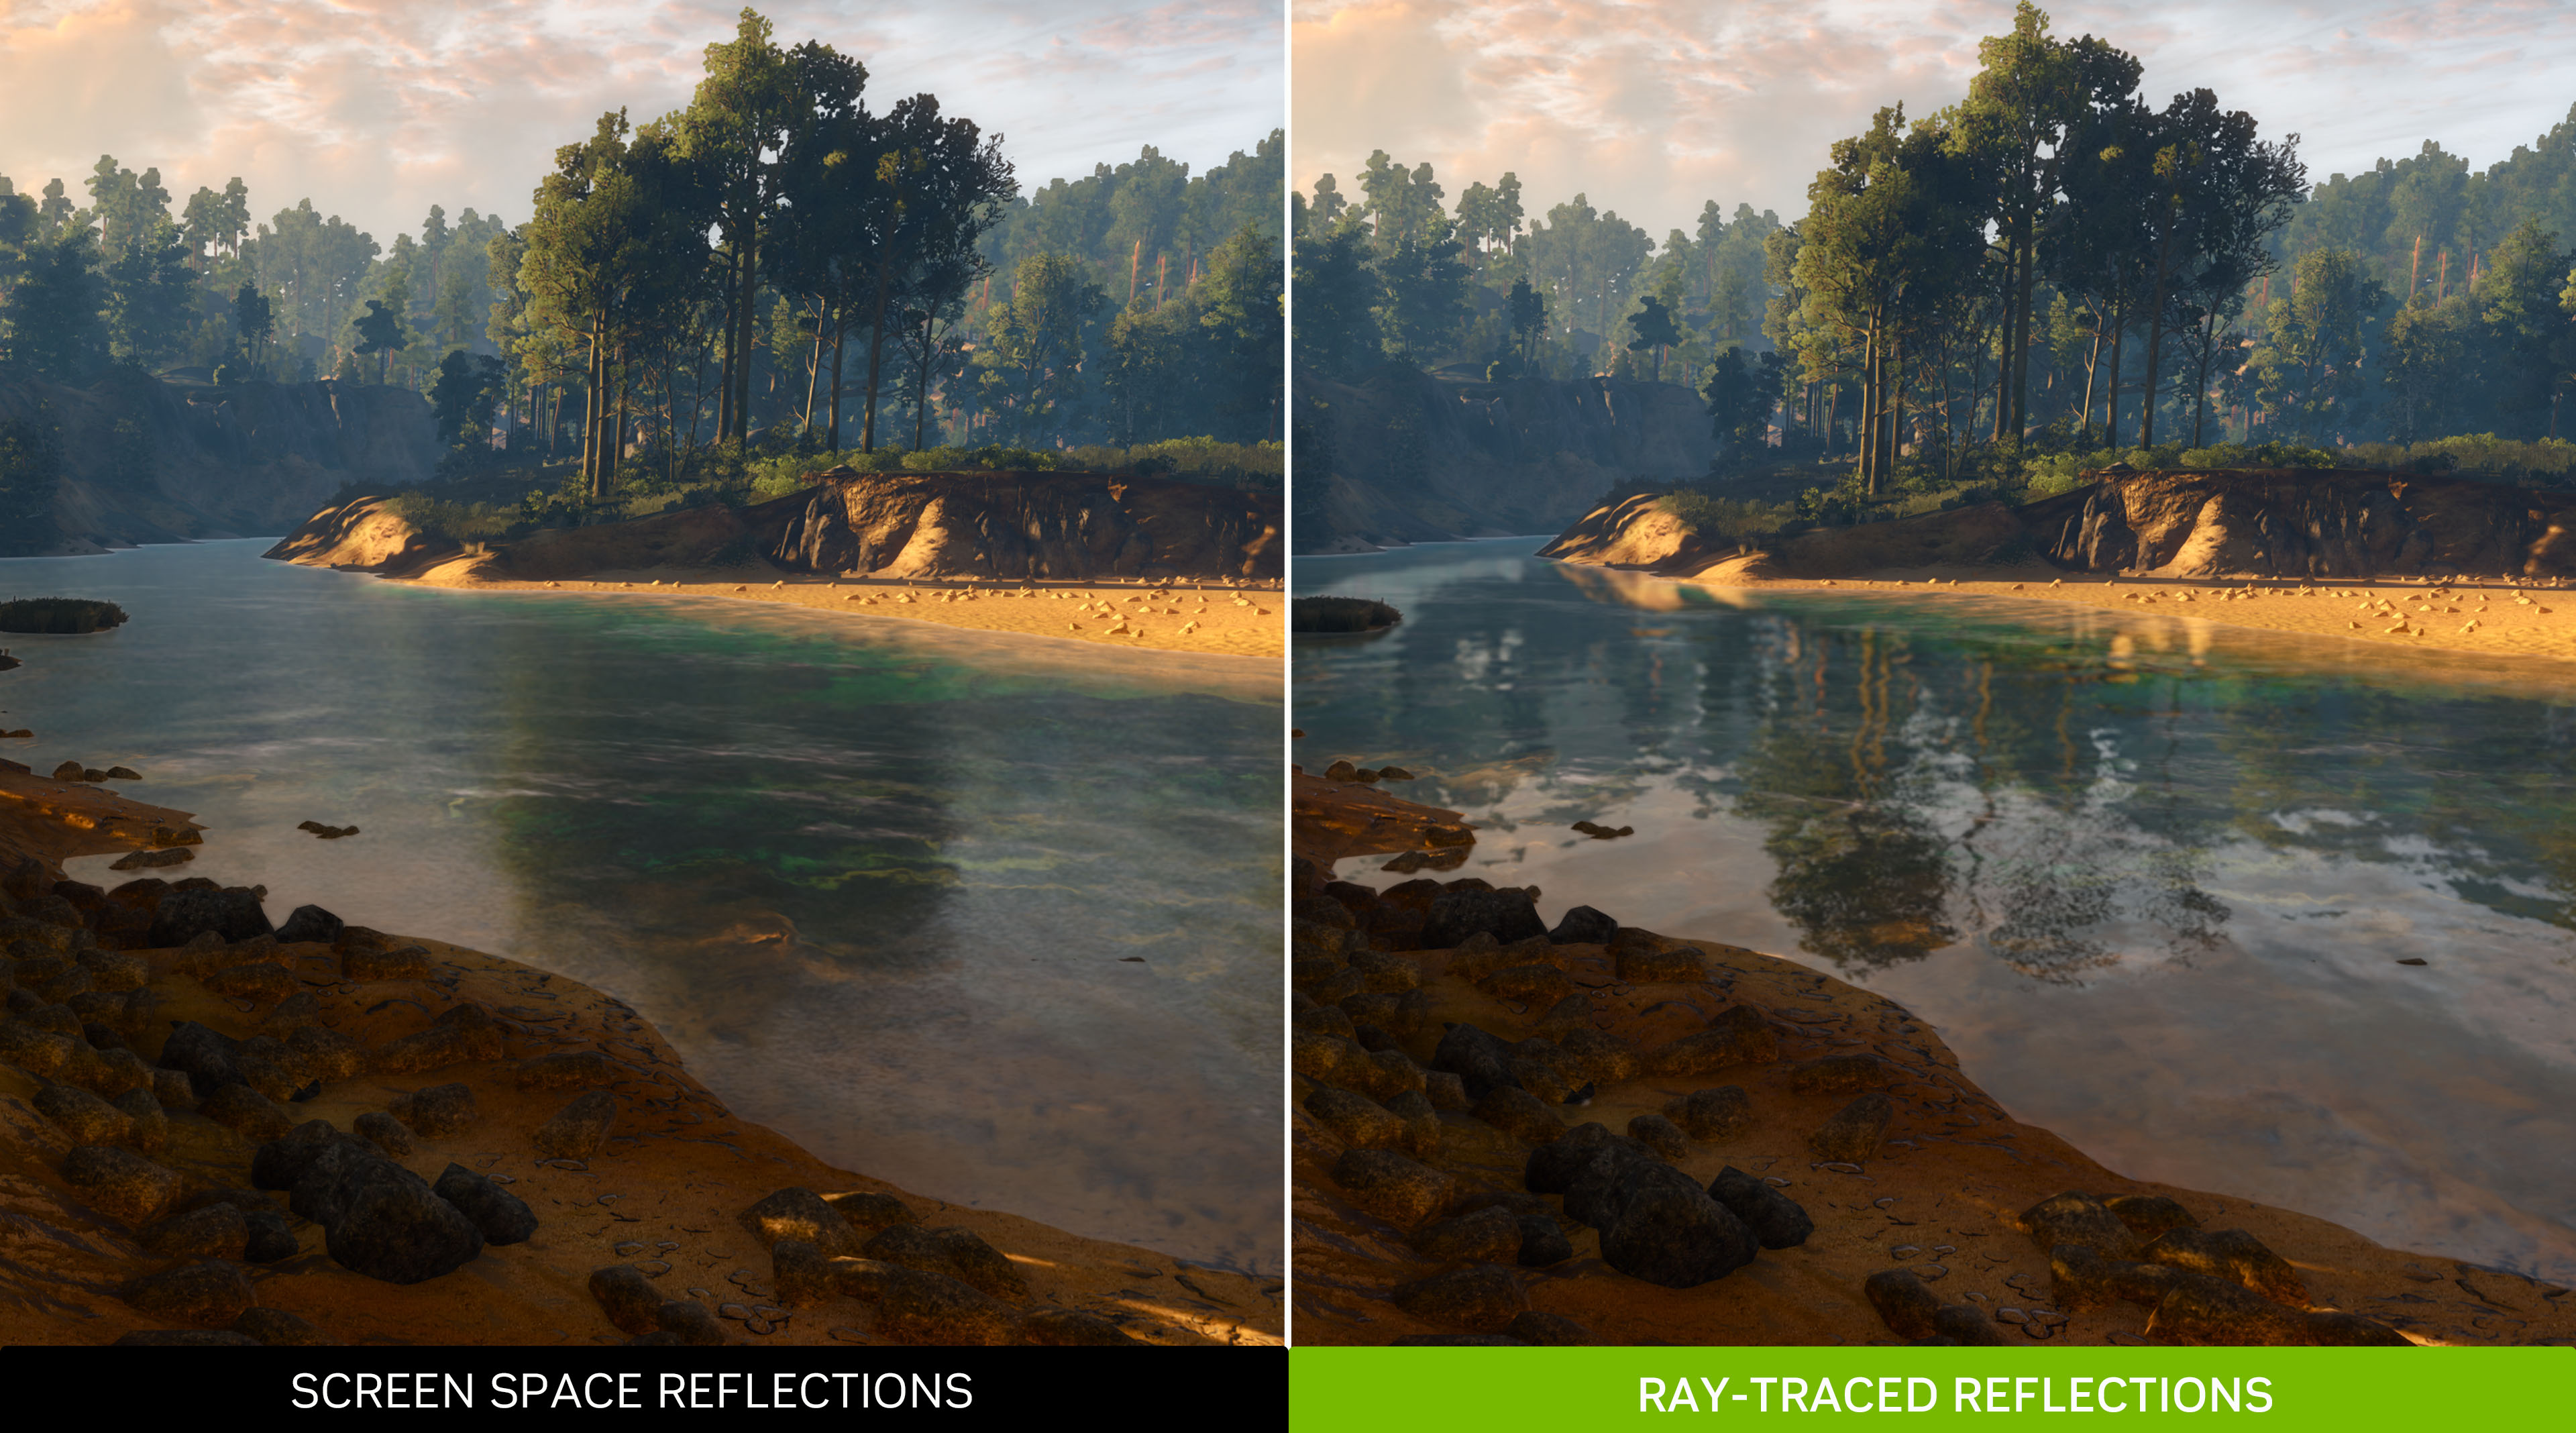 Now it's GTA 5 and Witcher 3's turn to get the ray-tracing treatment